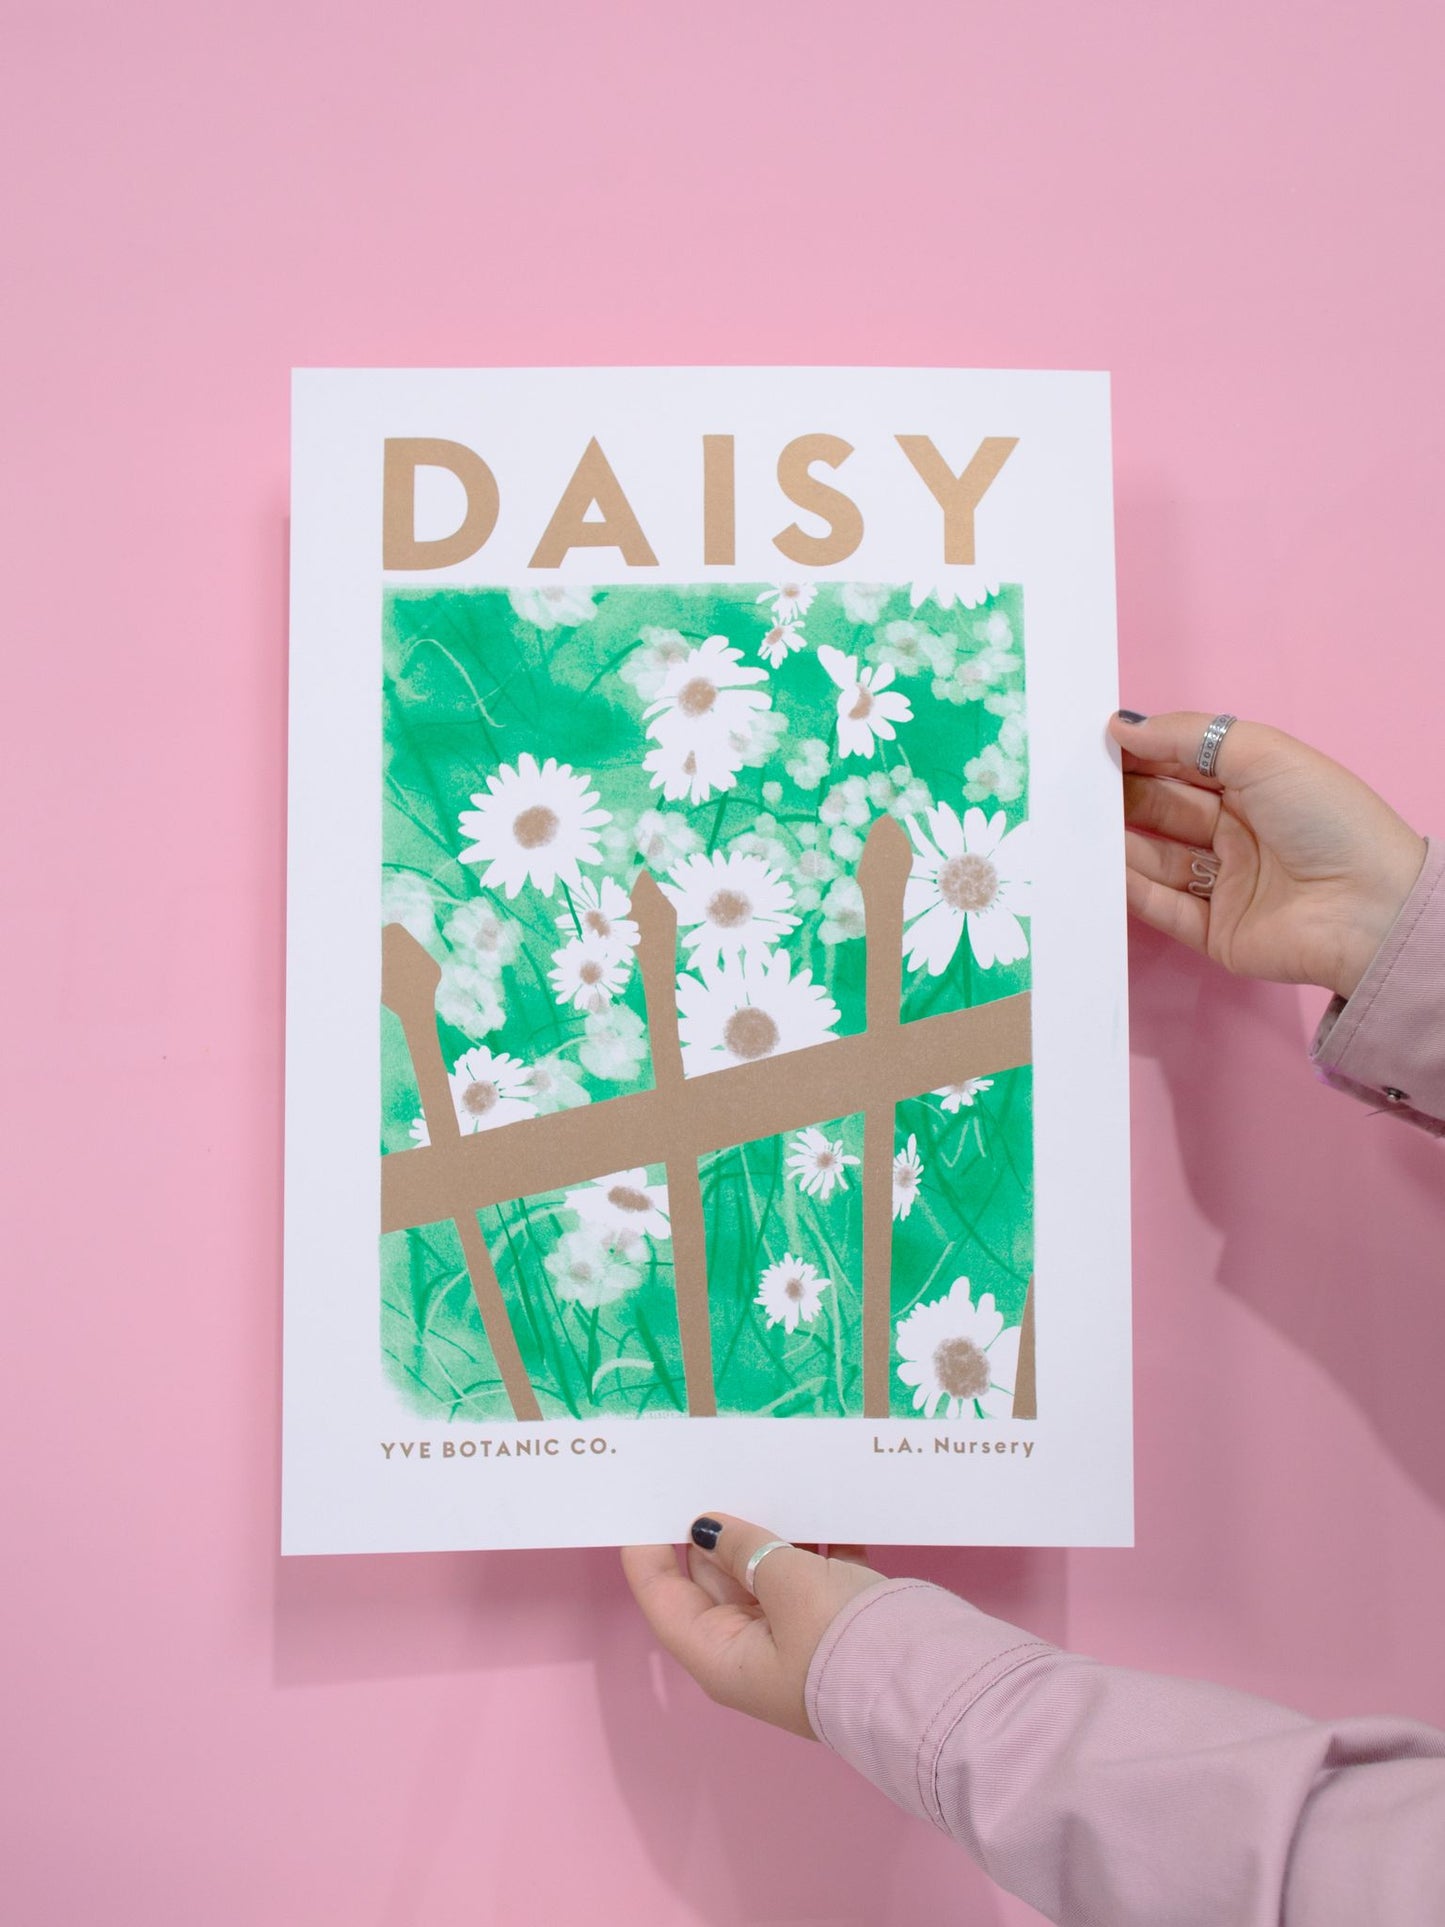 Load image into Gallery viewer, A someone holding a risograph print of a daisy and fence with the word Daisy at the top. Pink background in image.
